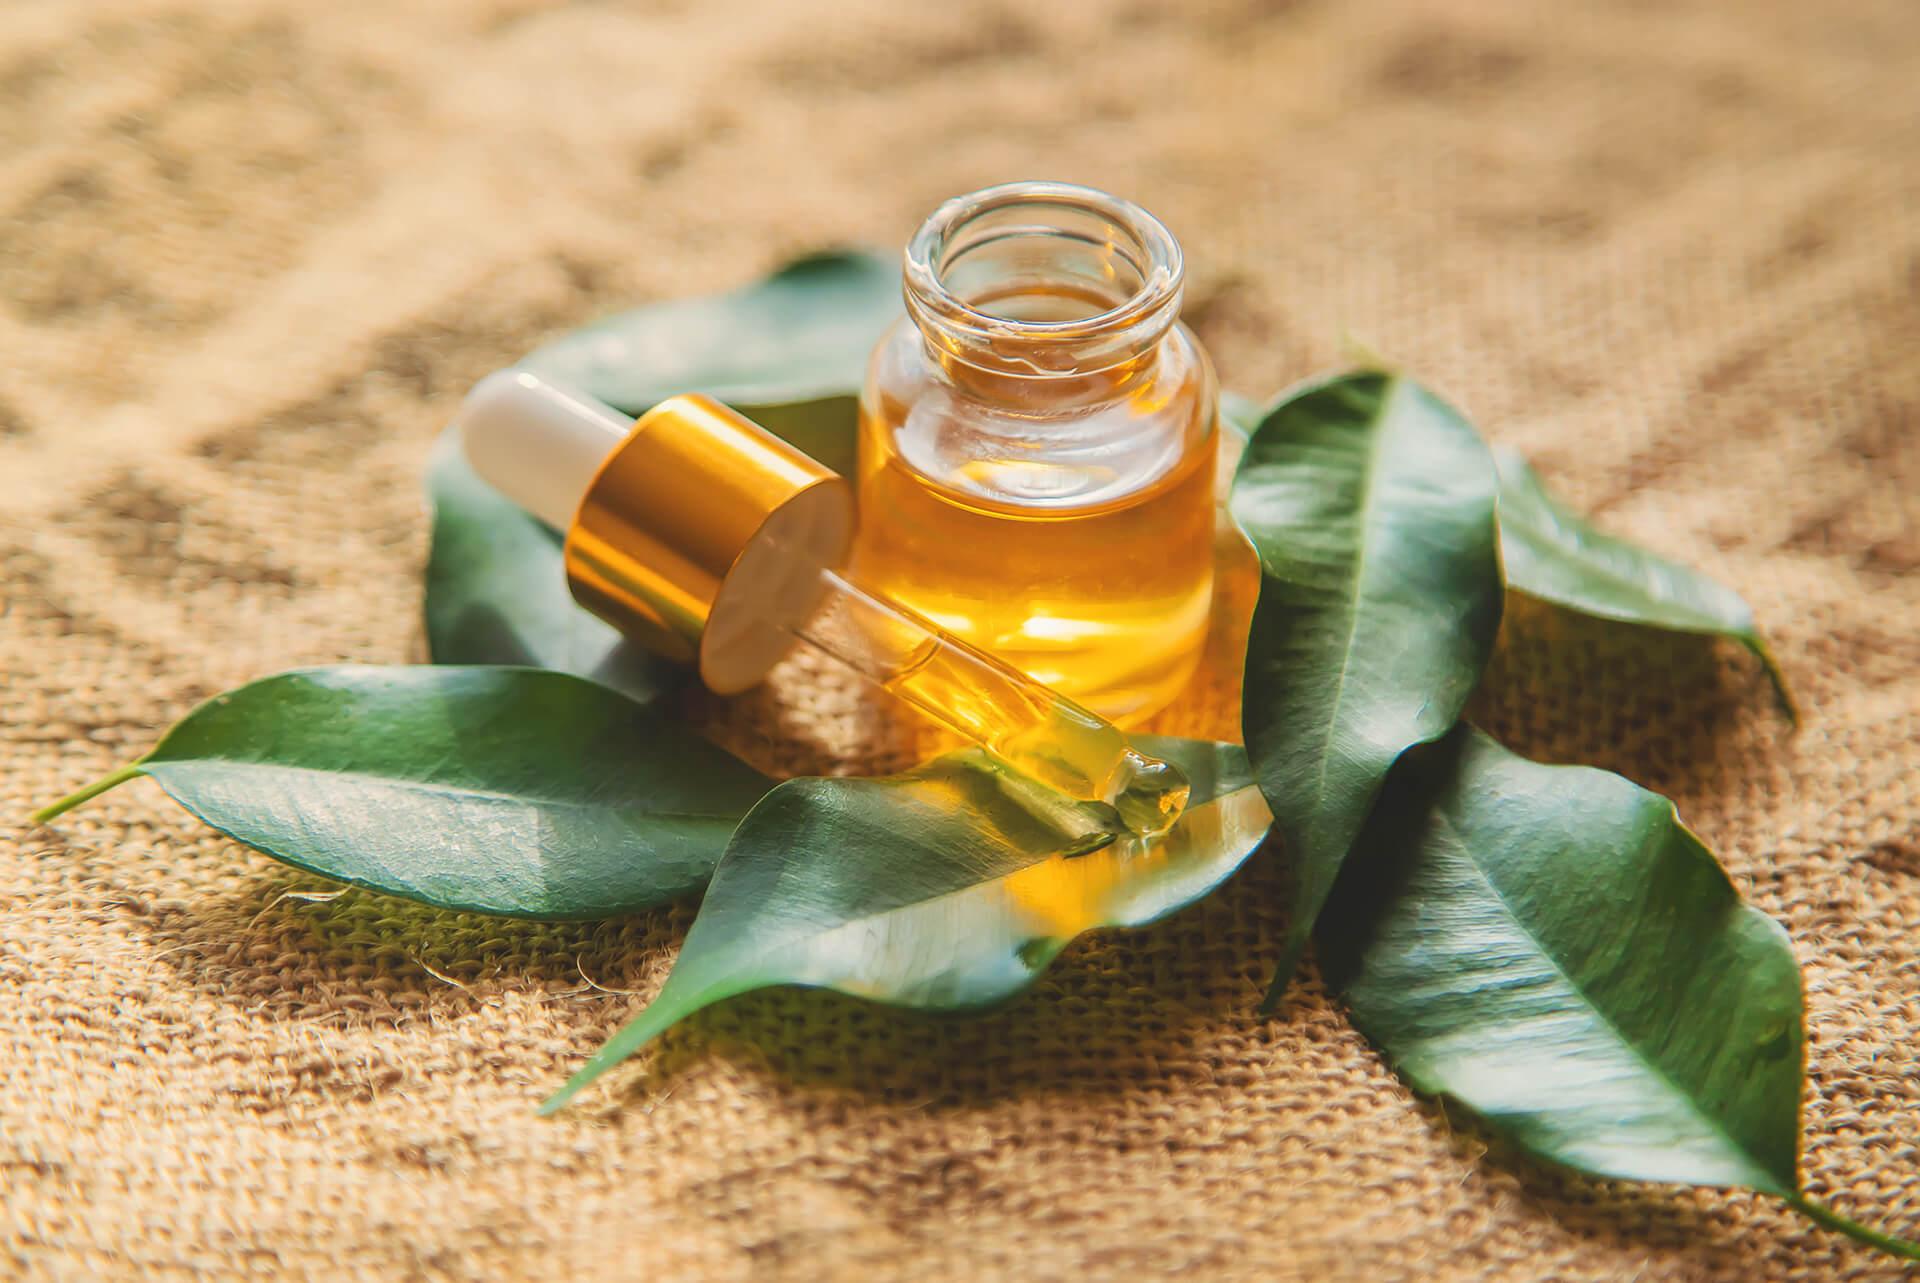 Tea Tree Oil: Uses, Benefits, Facts, and Risks